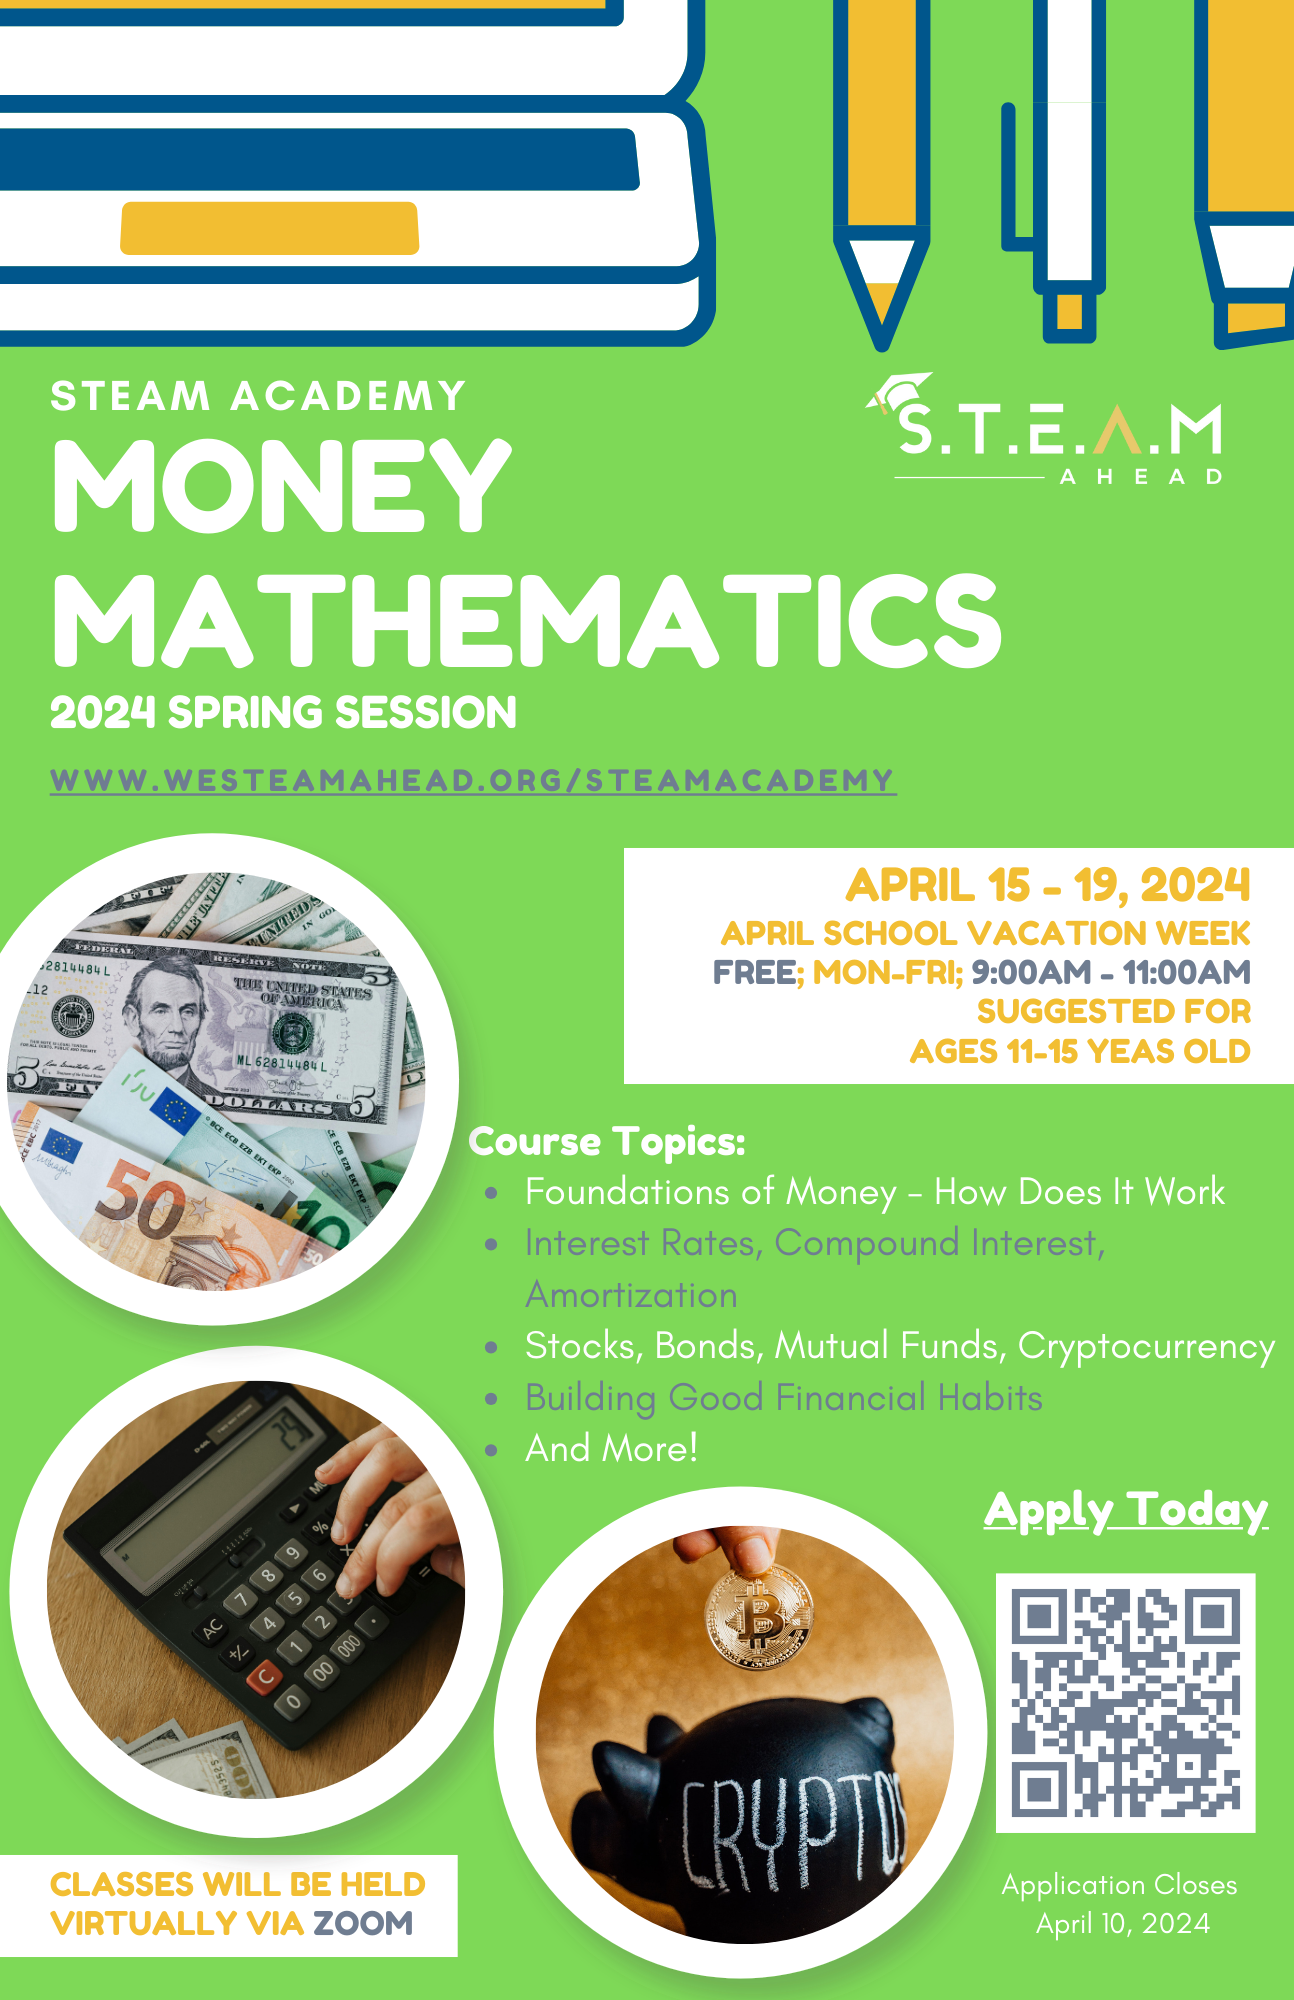 STEAM Academy - Money Mathematics (2024 Spring Session) Flyer [English - STEAM Ahead].png